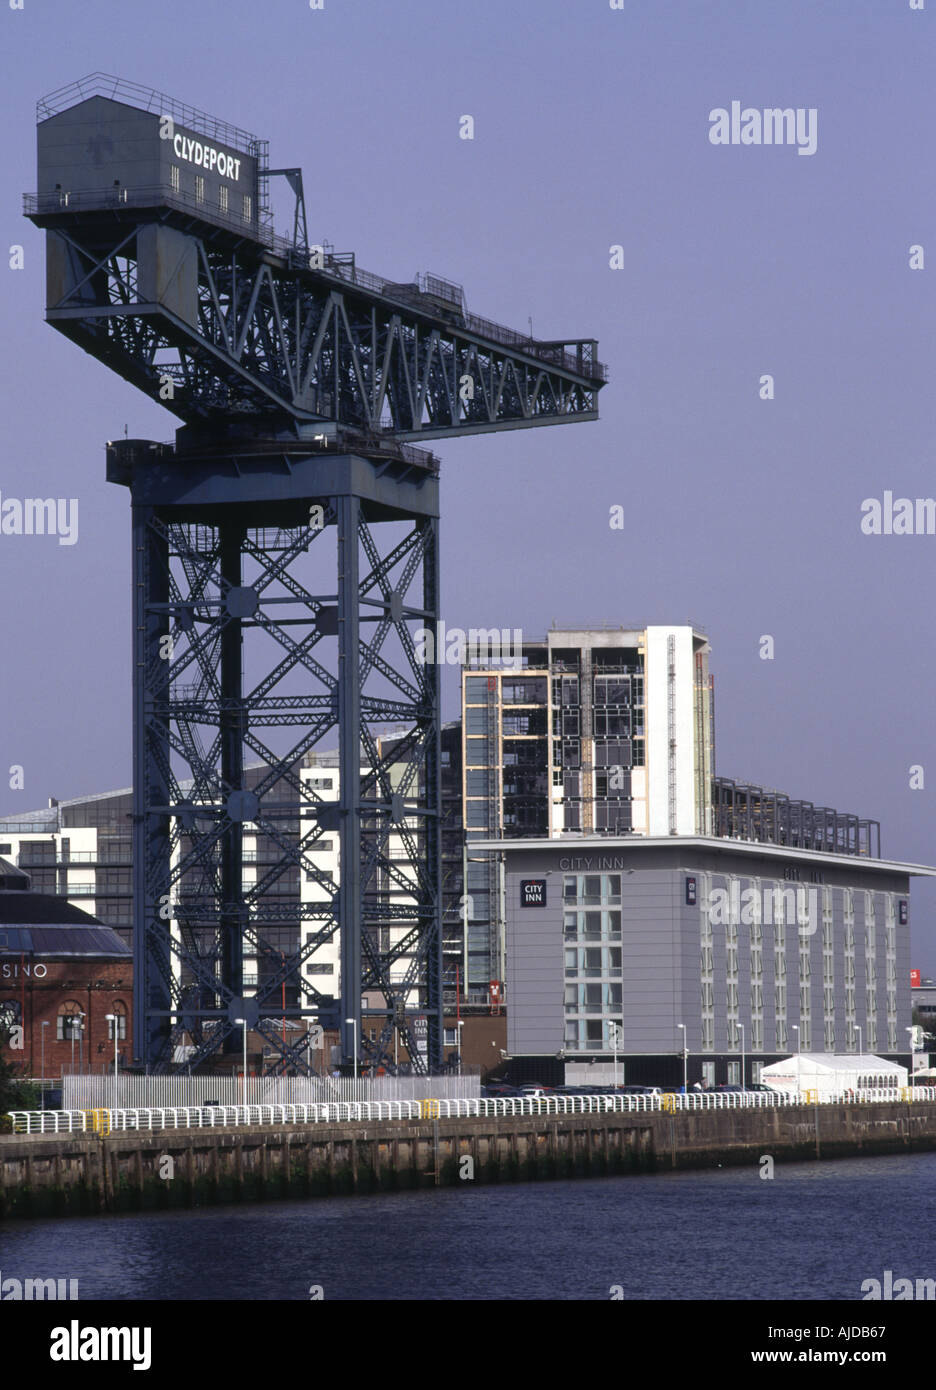 dh  RIVER CLYDE GLASGOW Clydebank Port Finnieston crane and modern buildings riverside quay Stock Photo